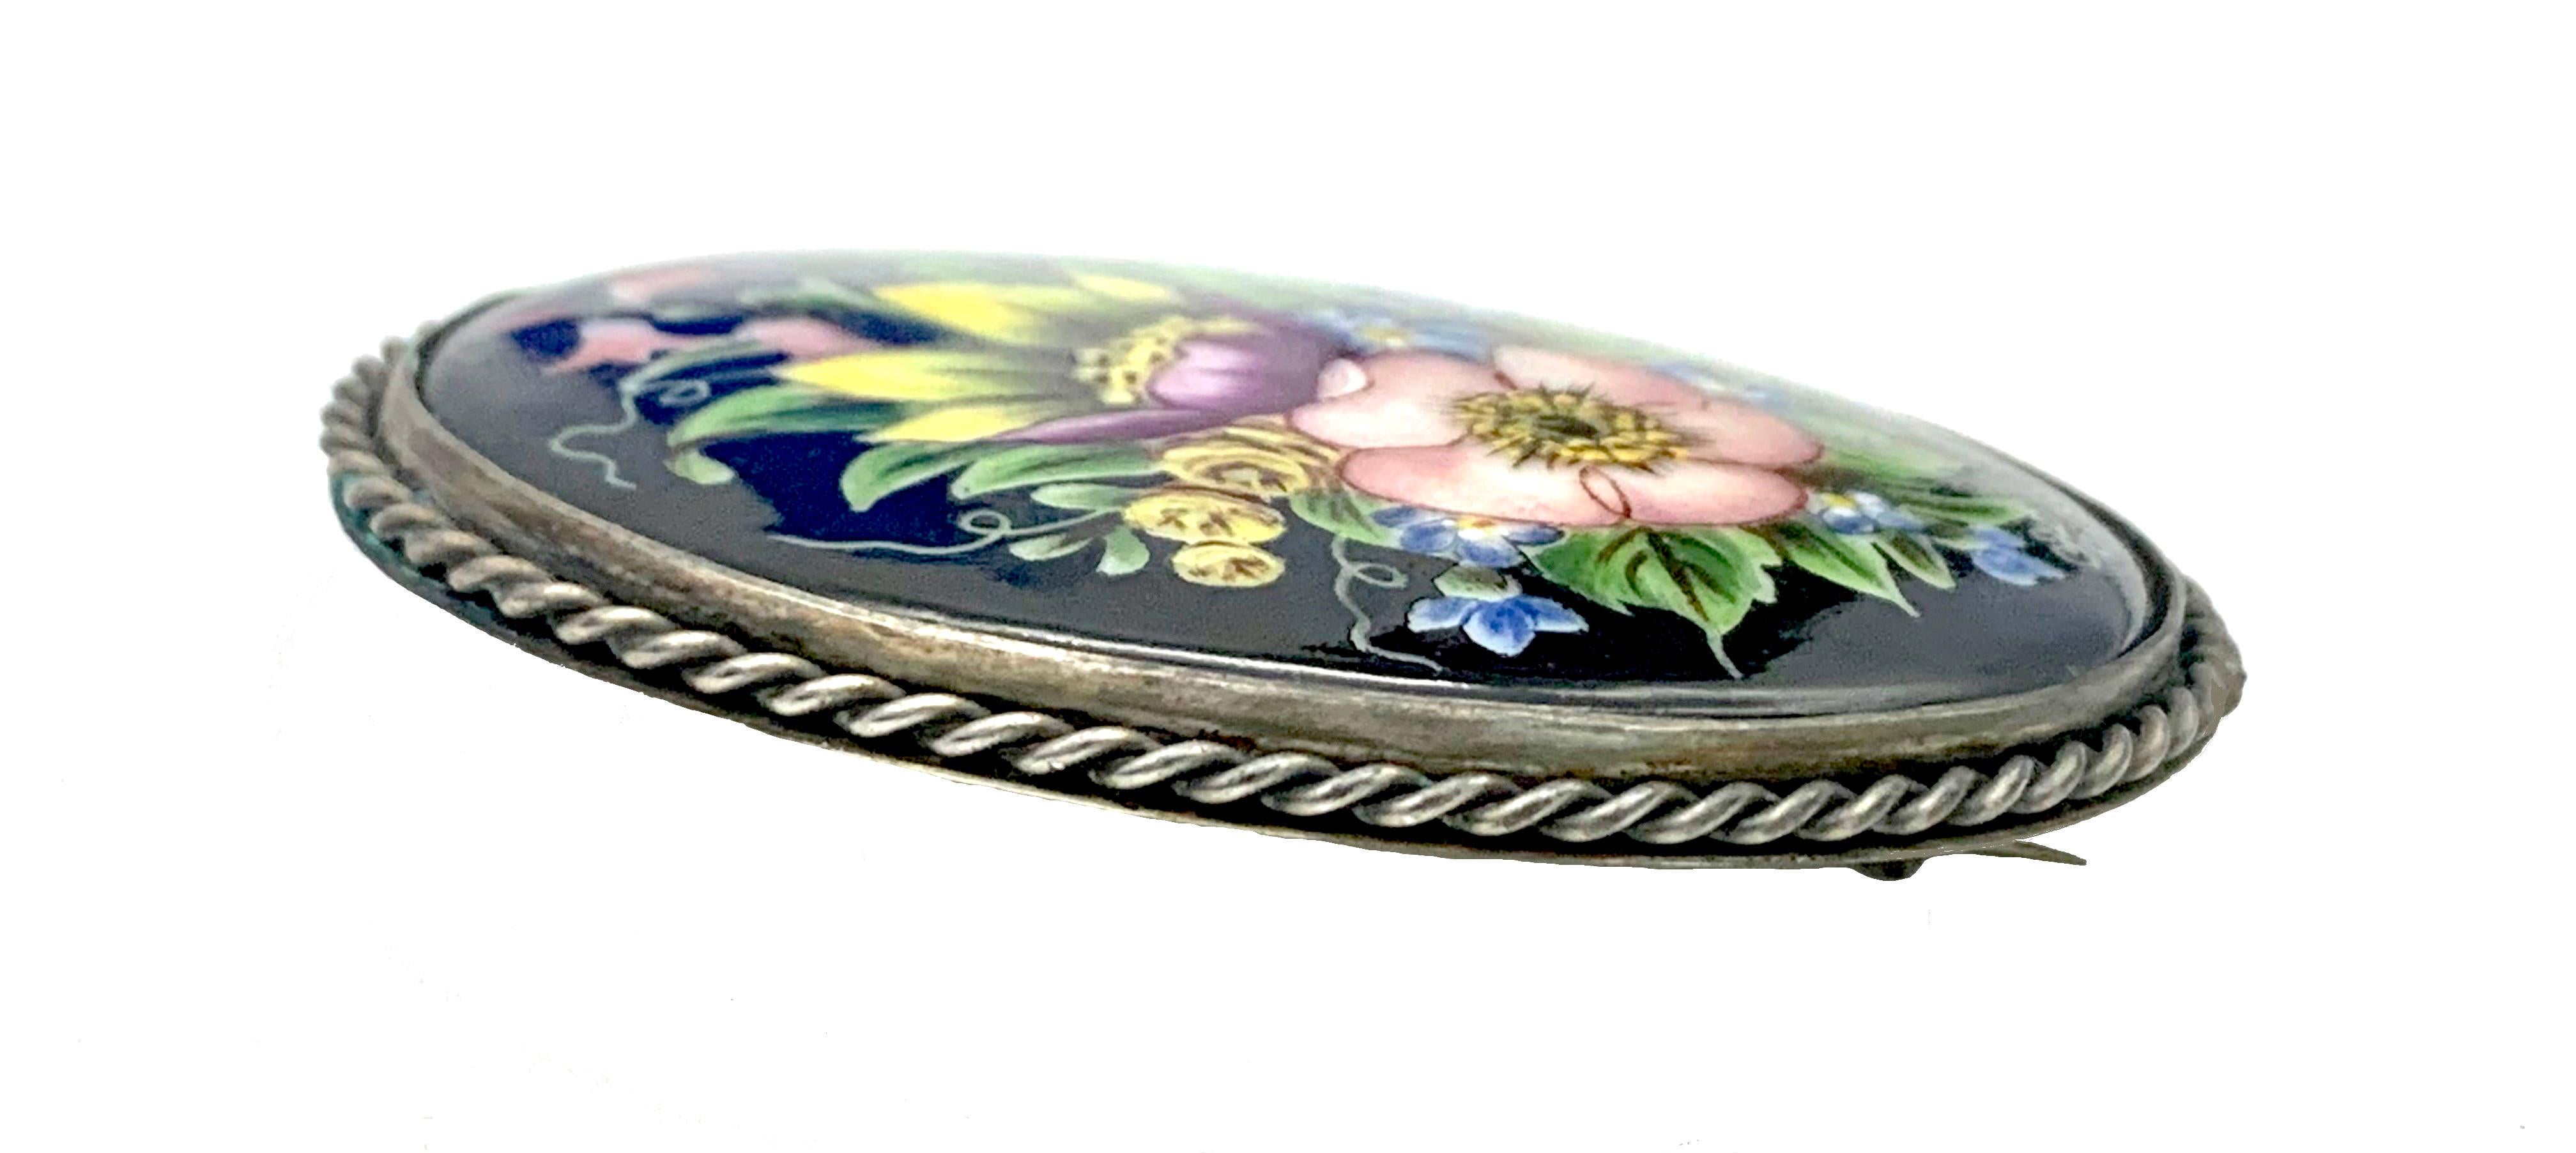 This oval porcelain miniature of a flamboyant flower arrangement on a black background is mounted in a silver brooch decorated with twisted silver wire.
The reverse of the brooch is fully signed 'C.Hopp', and impressed with Swedish silver